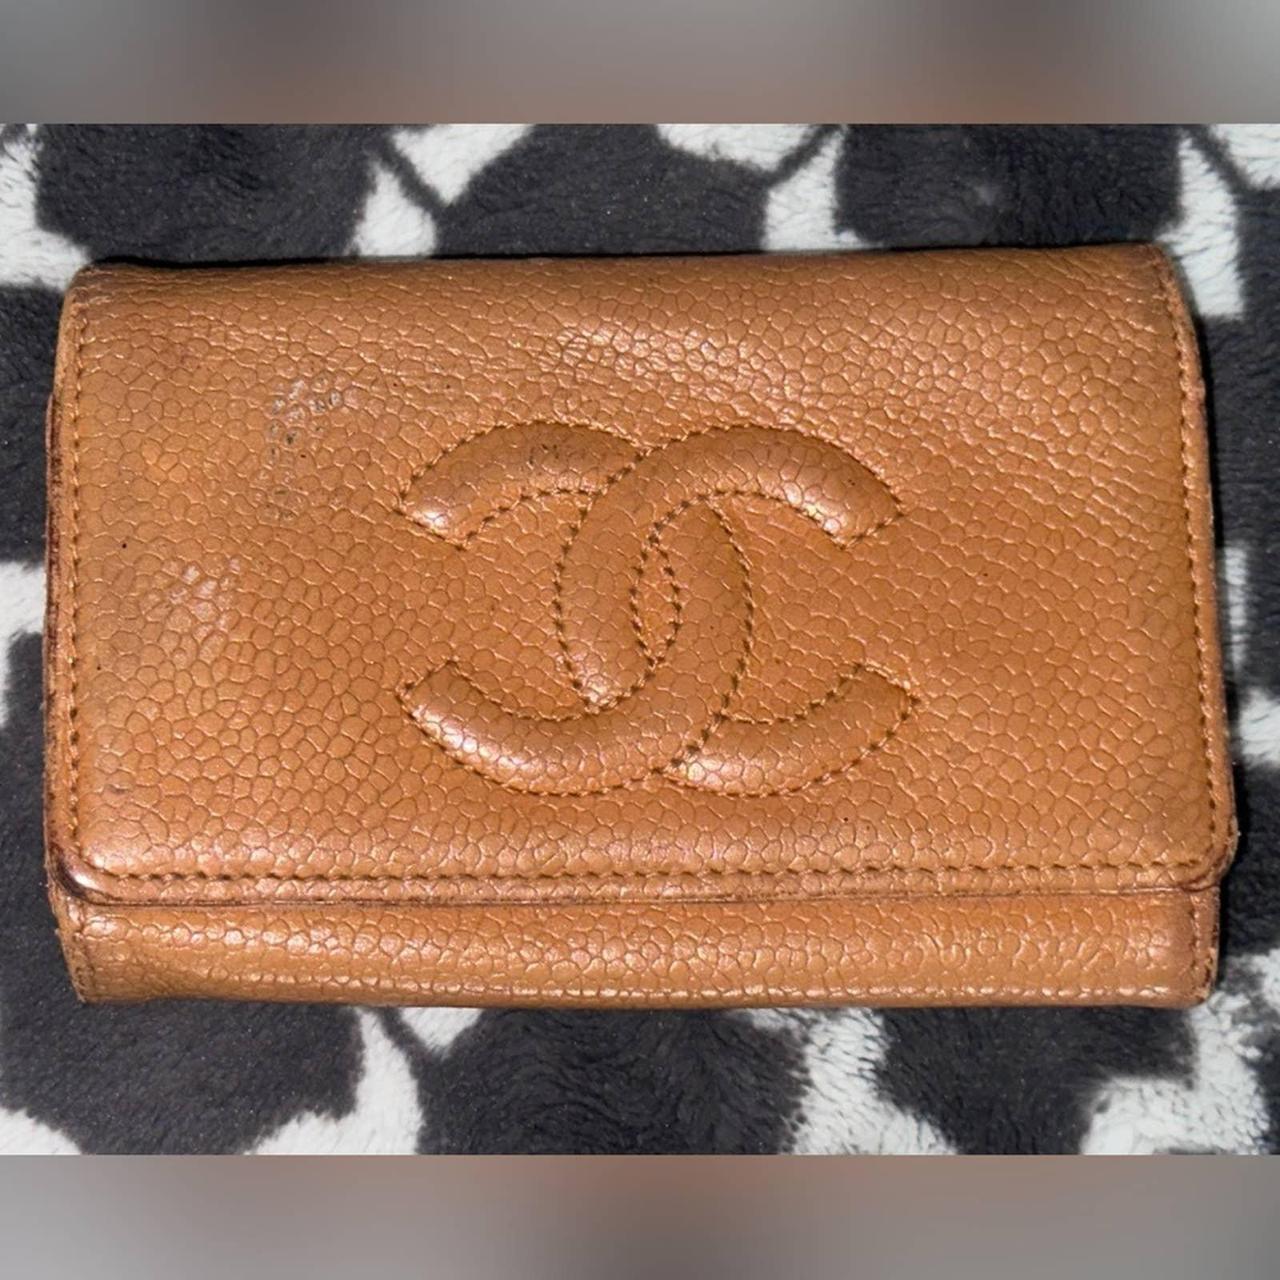 CHANEL Caviar Quilted Classic 4 Key Holder Wallet Black 1159121